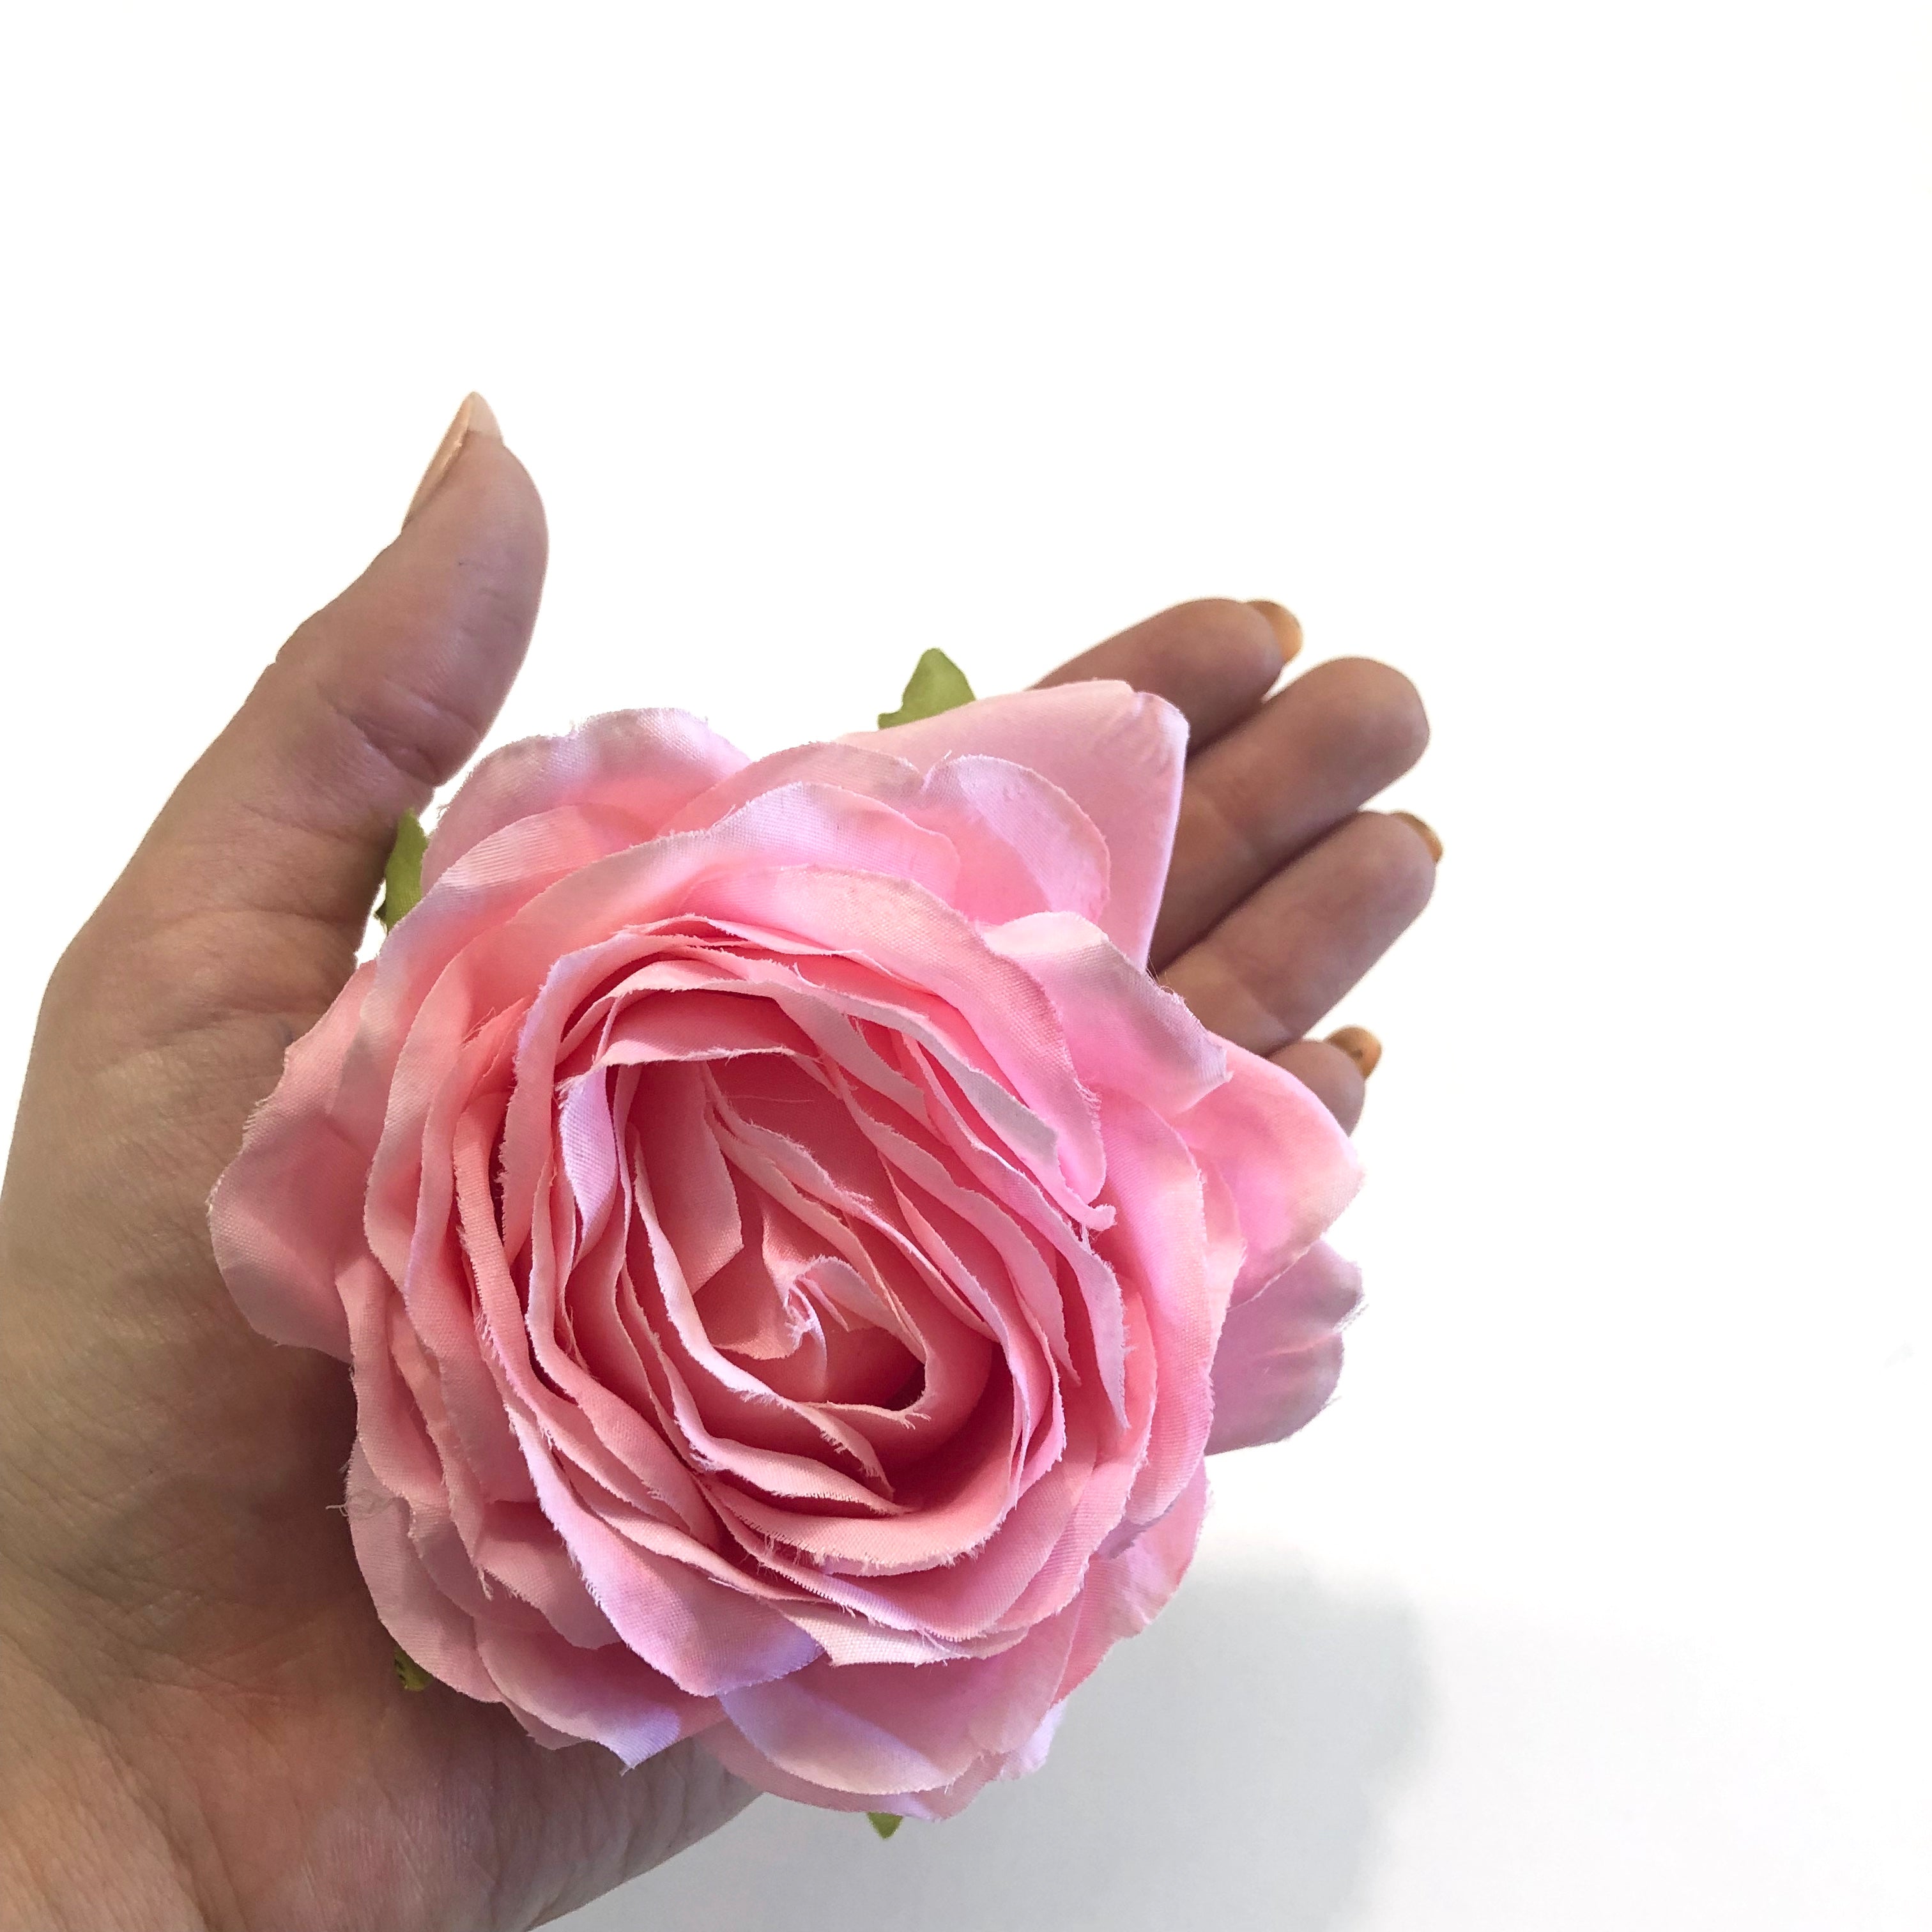 Artificial Silk Flower Head - Pink Rose Style 93 - 1pc